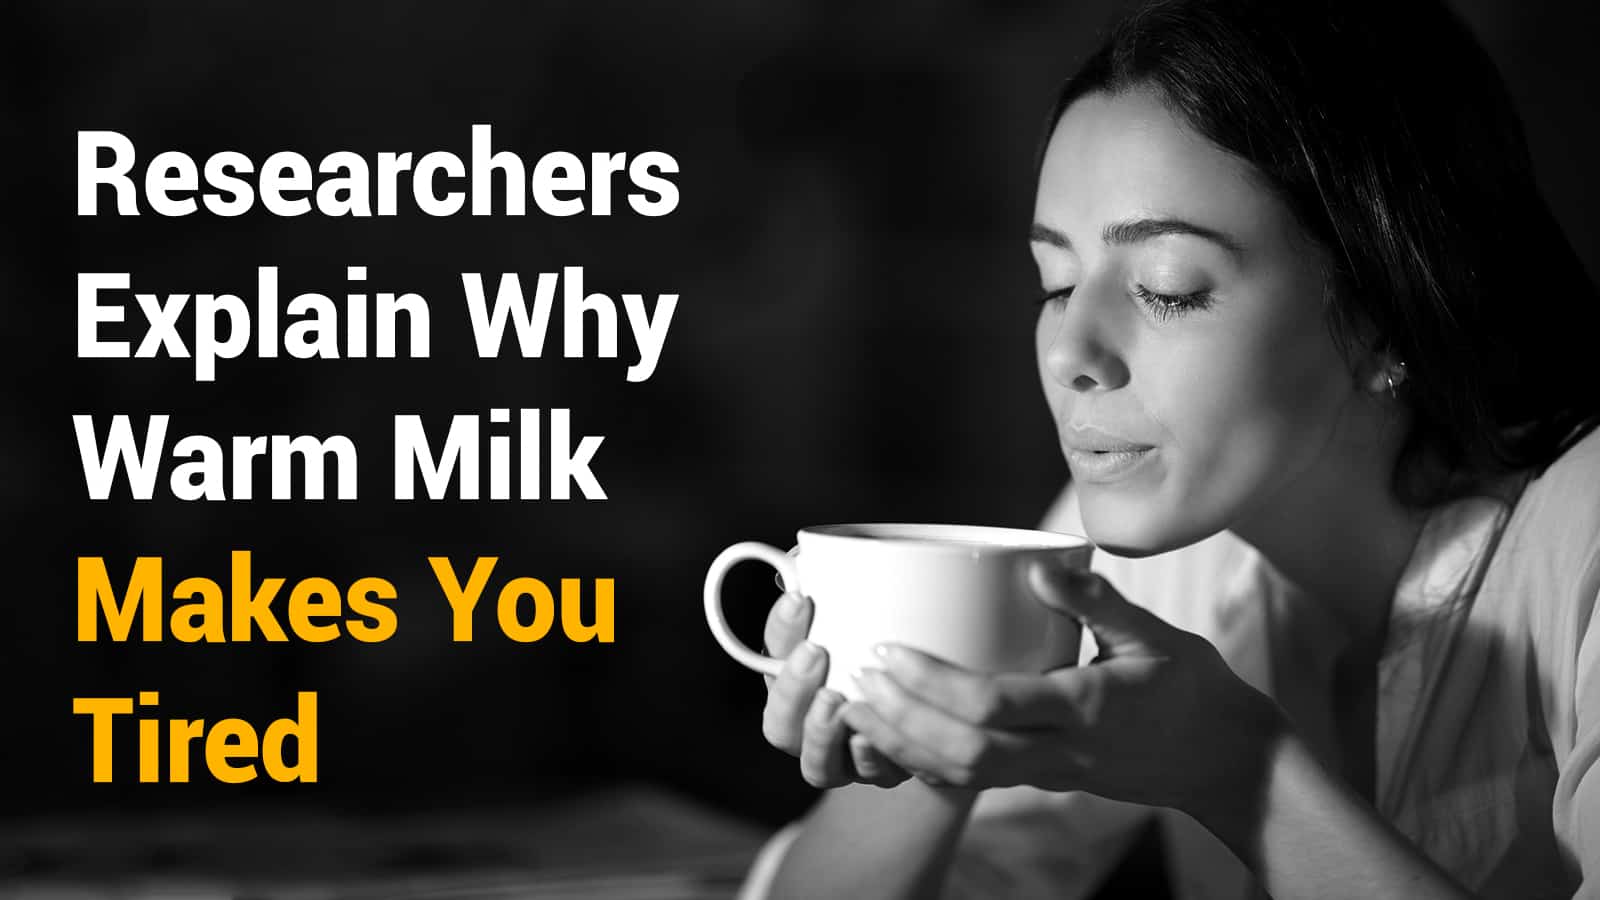 Researchers Explain Why Warm Milk Makes You Tired